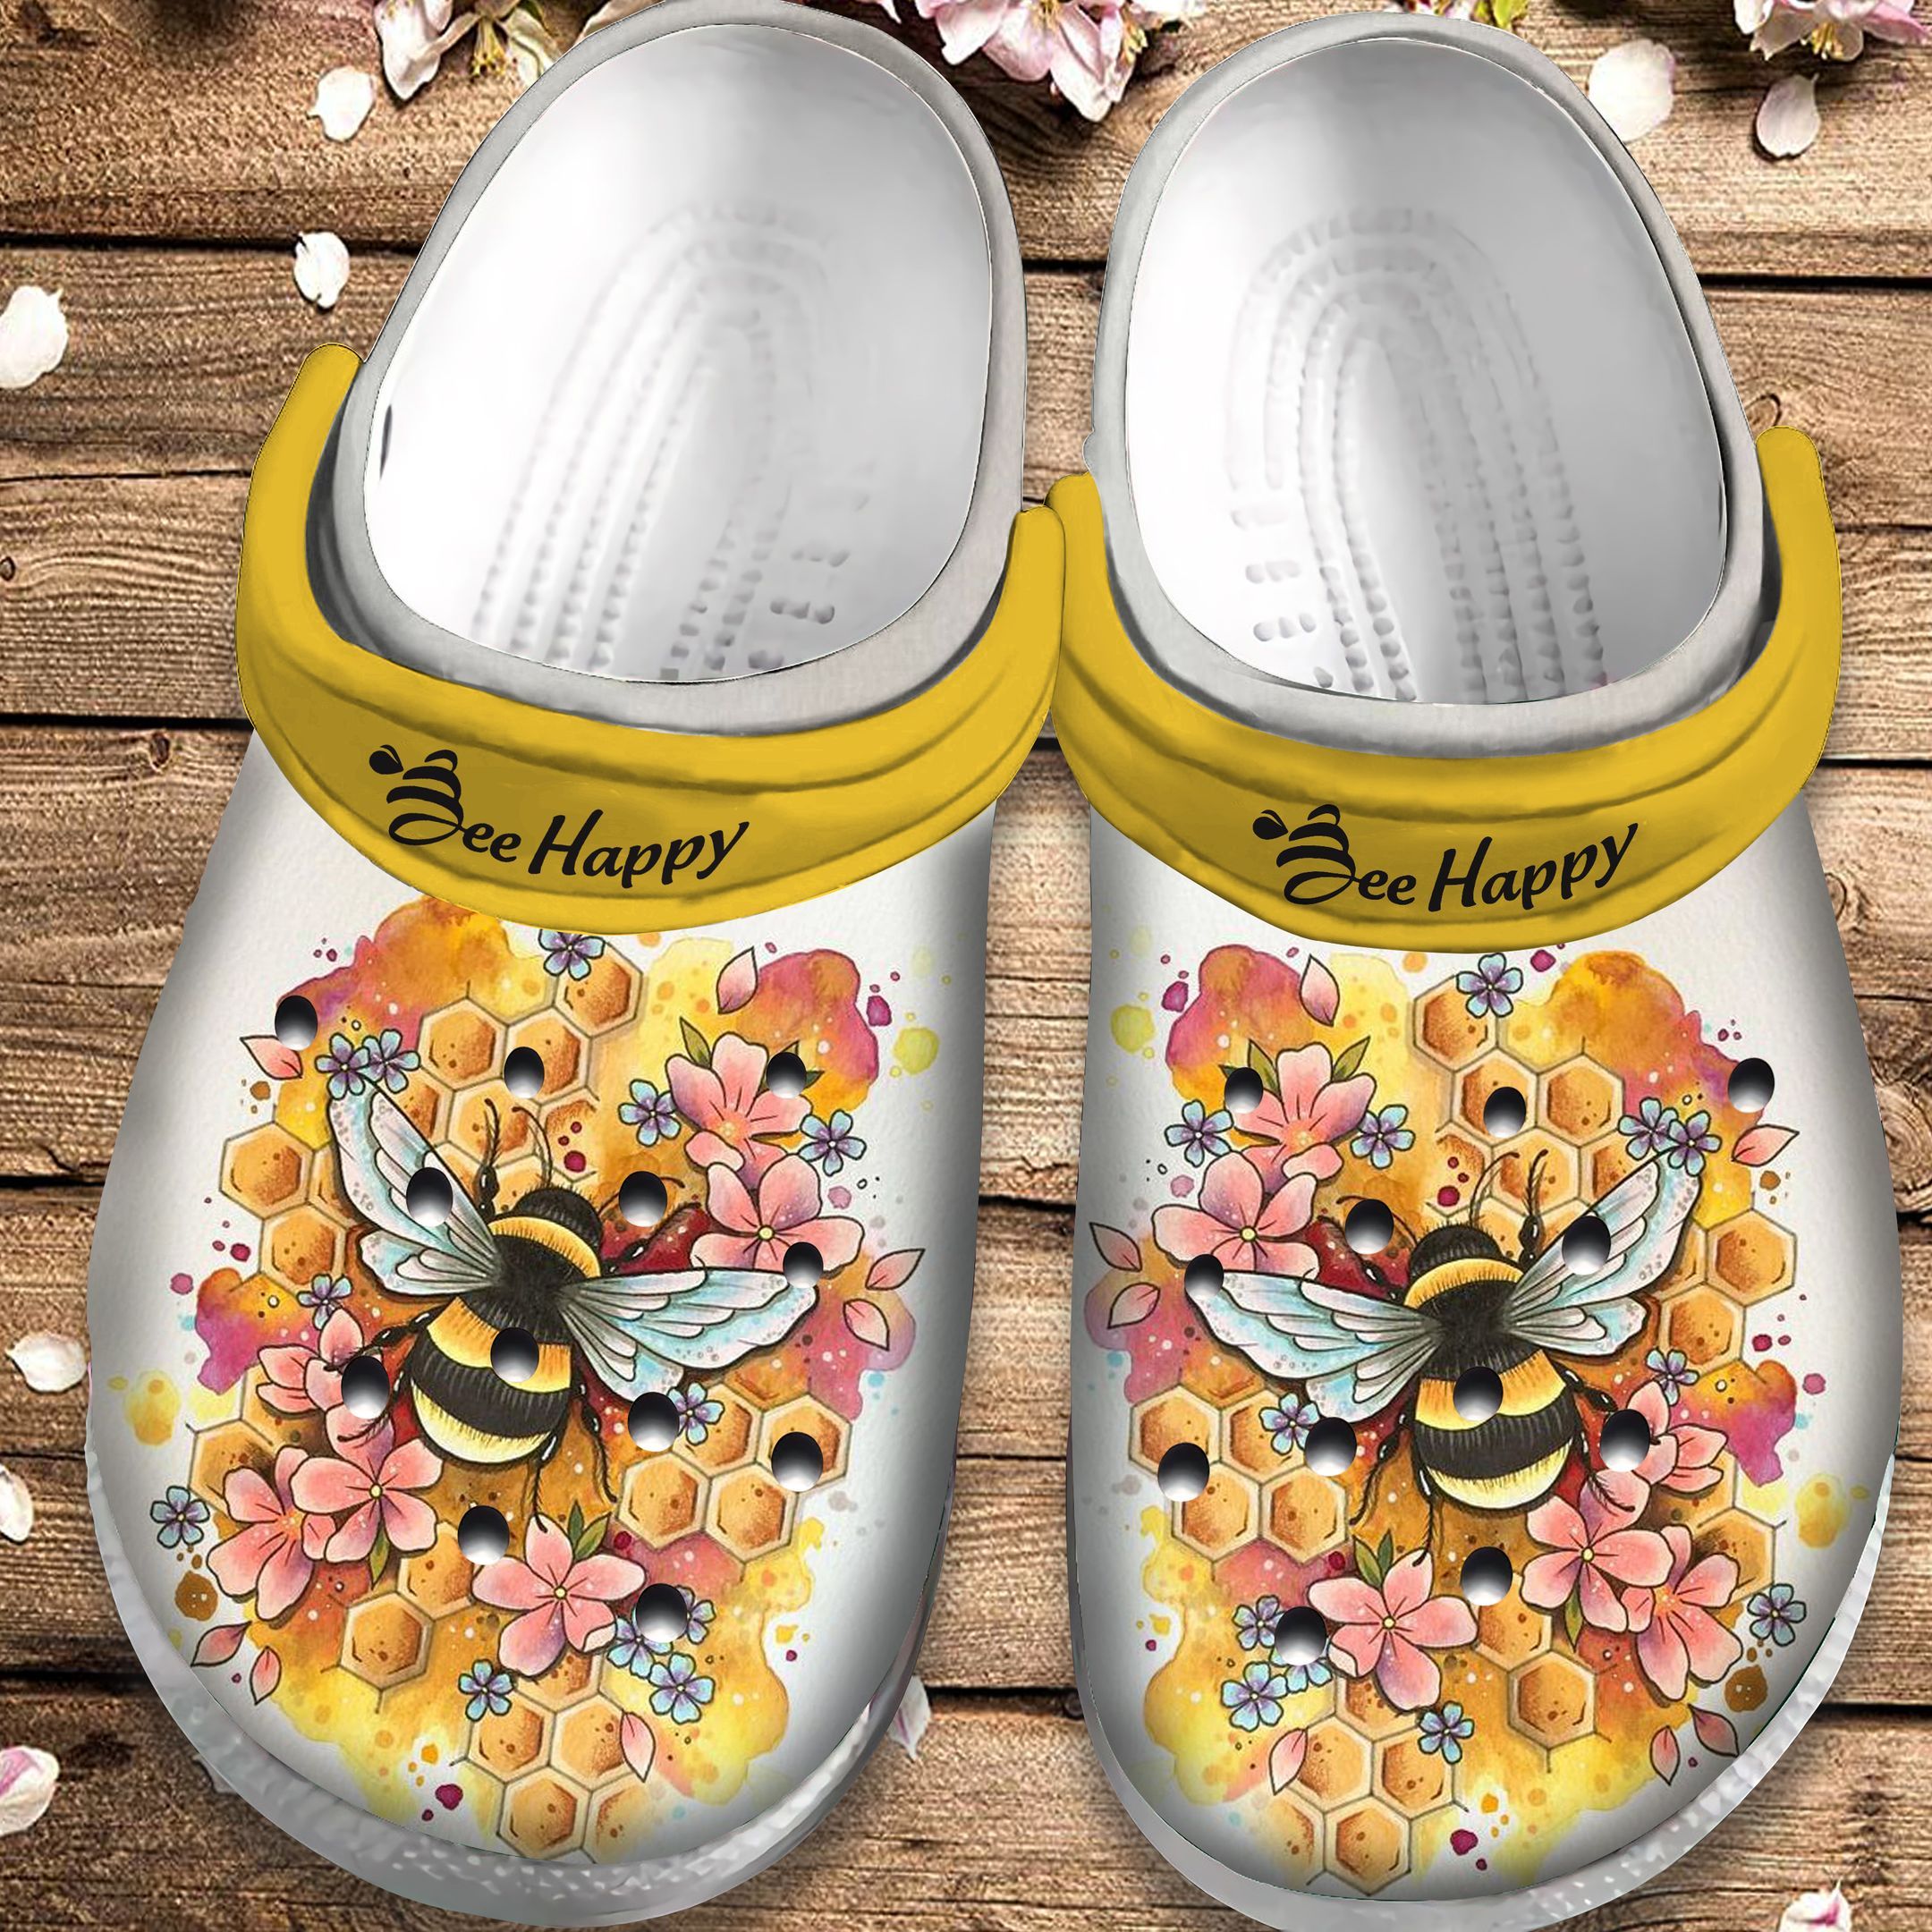 Bee Happy Shoes – Flower Honey Crocs Crocbland Clog Gift For Woman Girl Mother Daughter